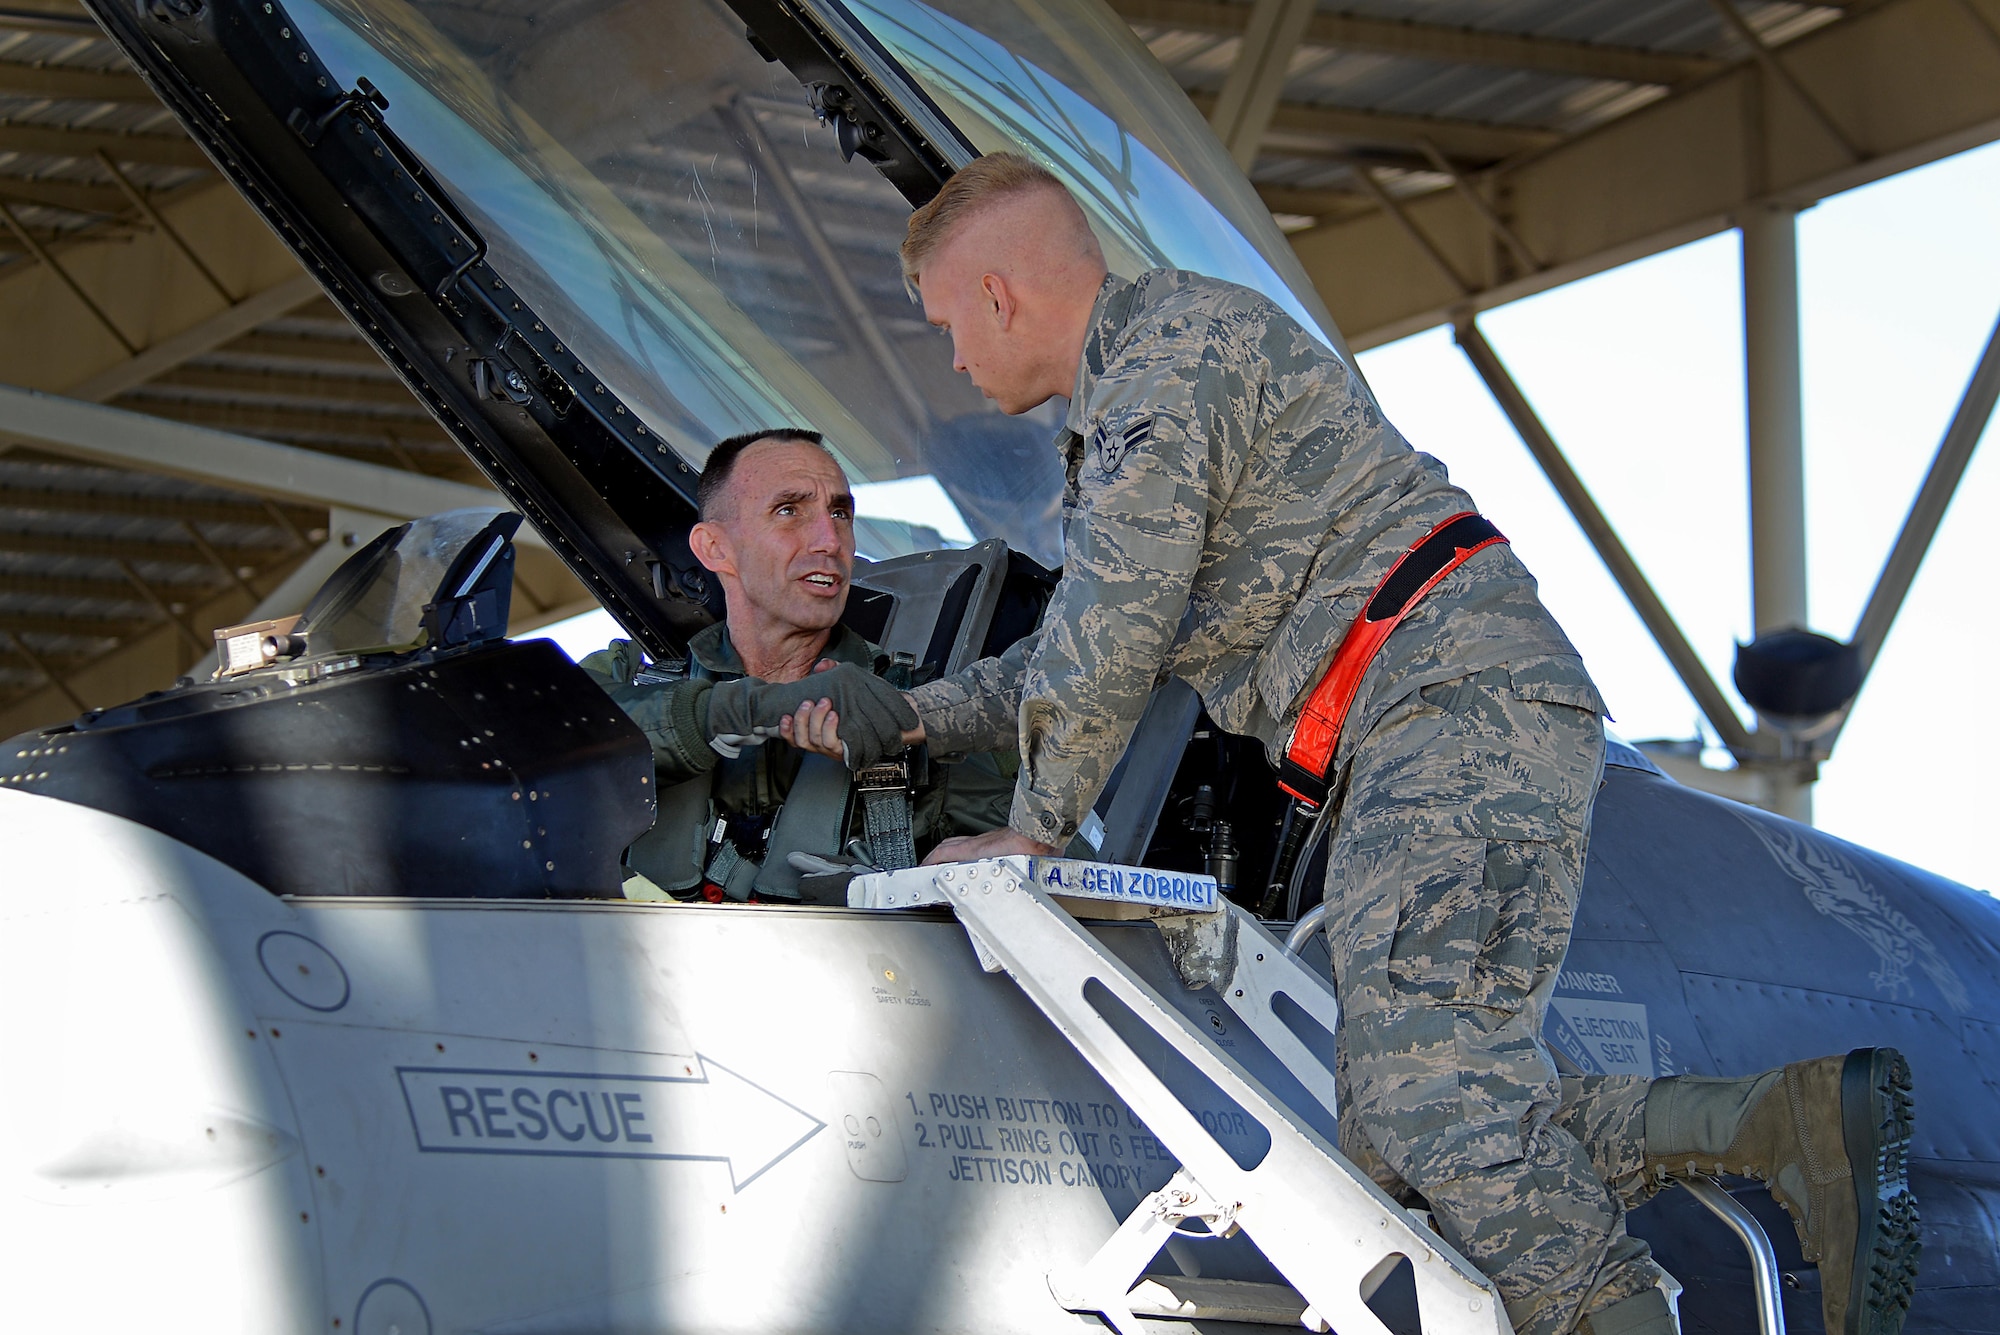 U.S. Air Force Maj. Gen. Scott Zobrist, 9th Air Force commander, shakes hands with Airman 1st Class Michael Gradecki, a 20th Aircraft Maintenance Squadron crew chief, as he prepares for takeoff at Shaw Air Force Base, S.C., Dec. 1, 2016. Zobrist assumed command of 9th Air Force in May 2016 and has held staff positions at the Air Staff, Air Combat Command and U.S. Forces Japan. (U.S. Air Force photo by Airman 1st Class Kelsey Tucker)